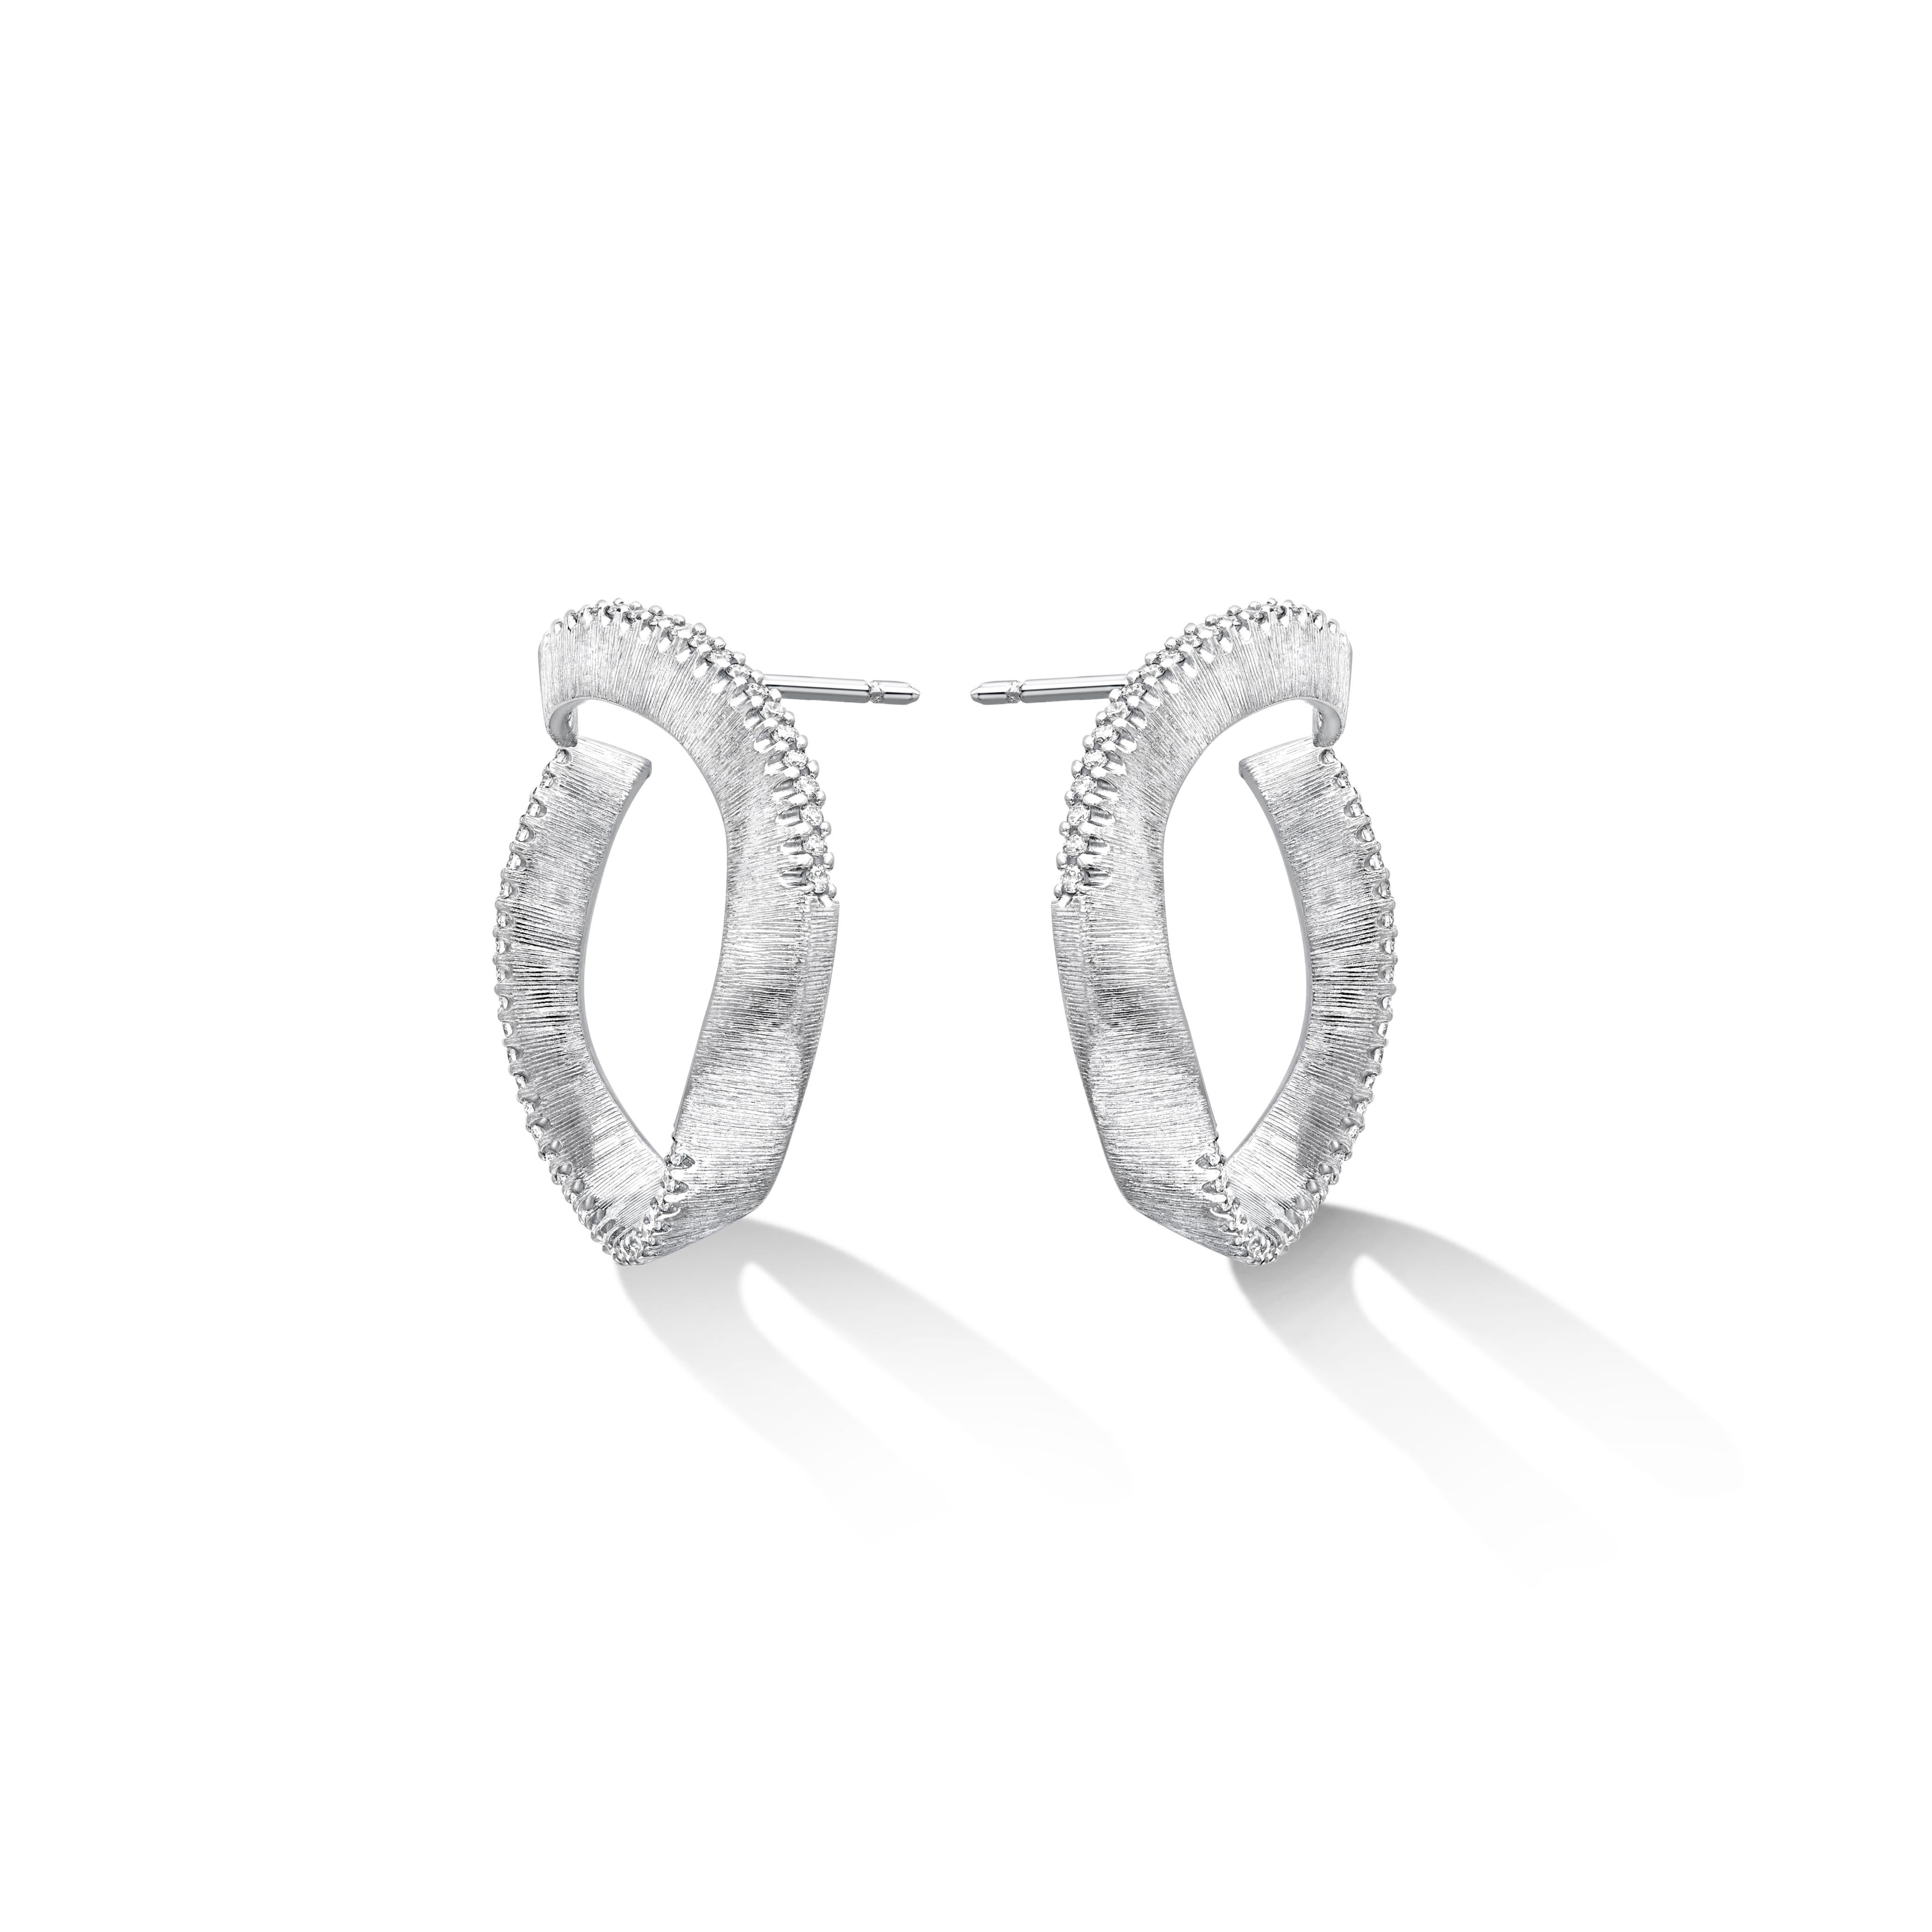 Liv Luttrell 
Diamond Edge Twist Hoop Earrings 2020

Details
18-karat white gold 
Natural white diamonds, Colour F+, Clarity VS+
Silk engraving
Made in London 


Customisation 

As this design is handmade to your order, Liv is able to customise the